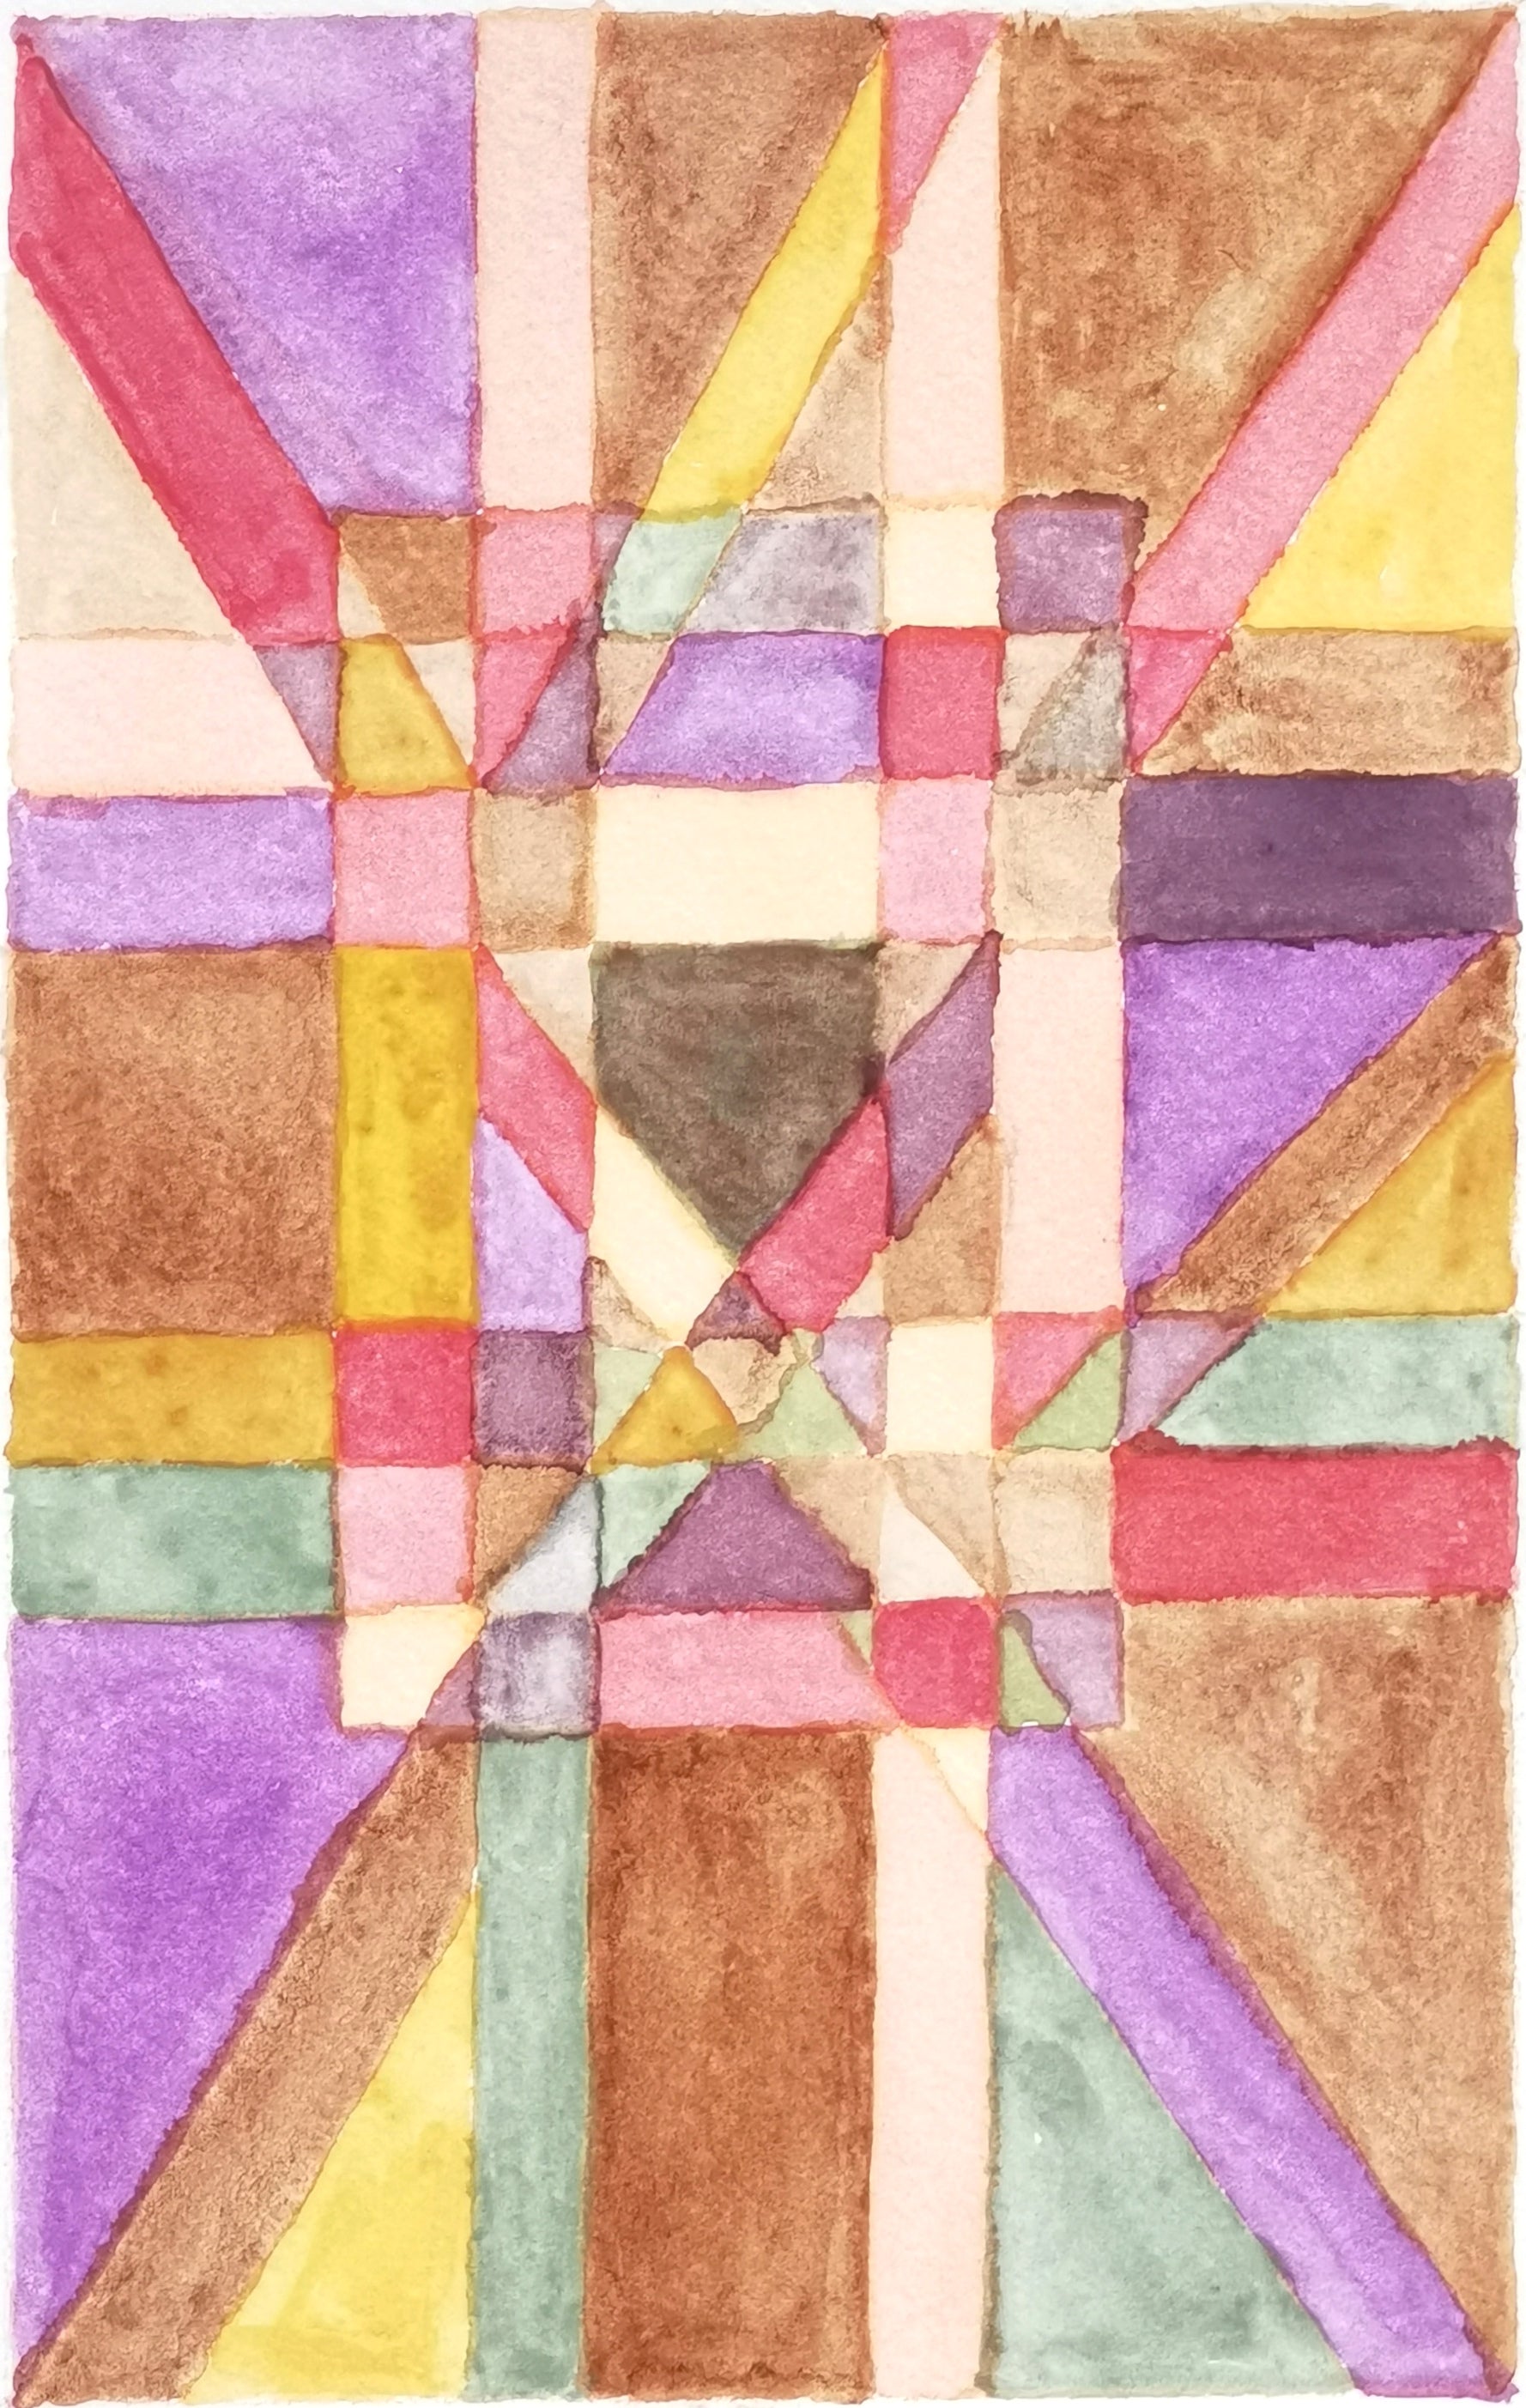 'WEIGHTINGS IN THE SYSTEM 13' - Watercolor on paper